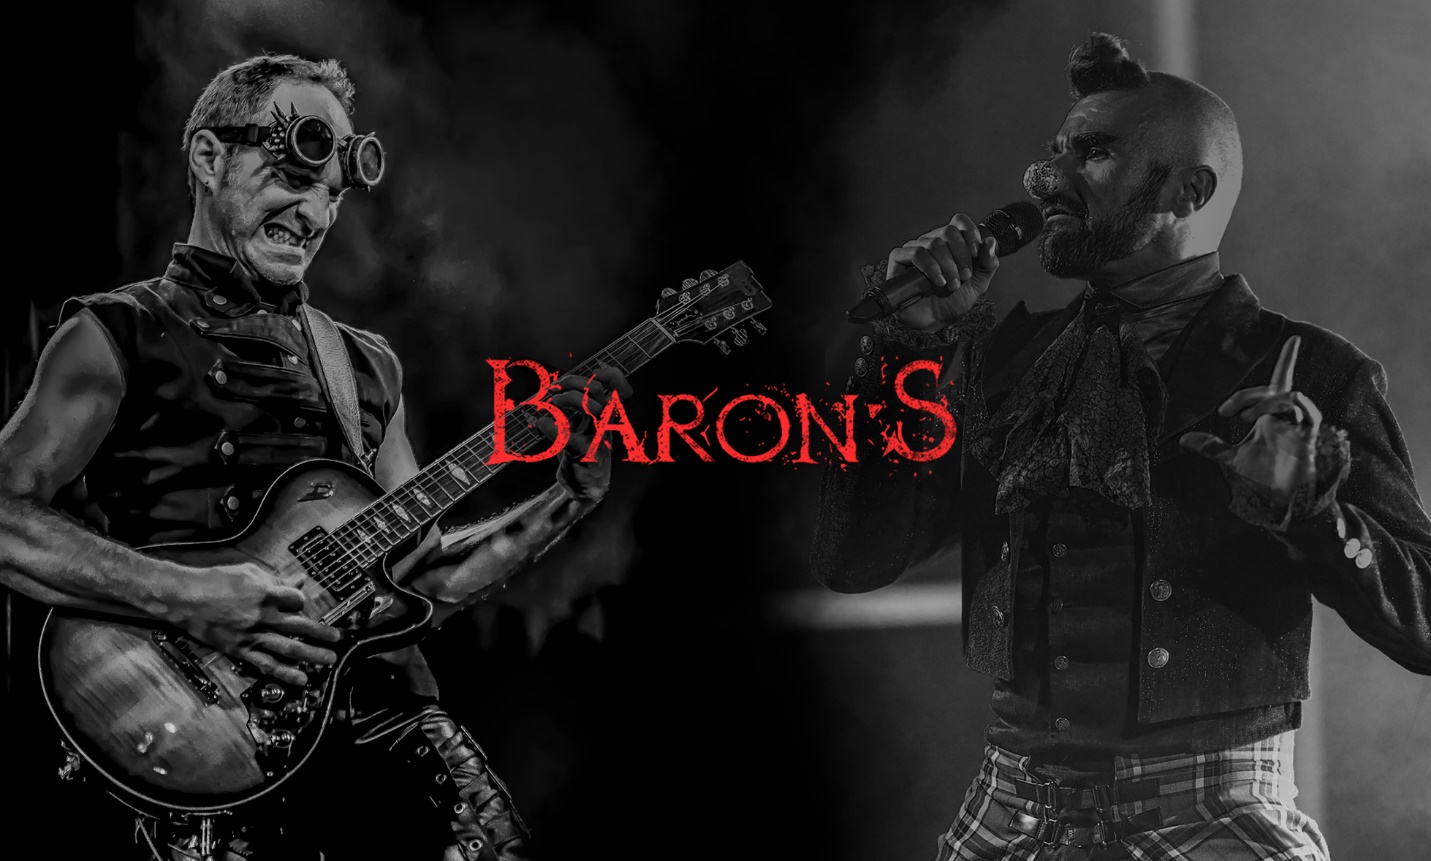 Never Alone by Baron's: Album Review